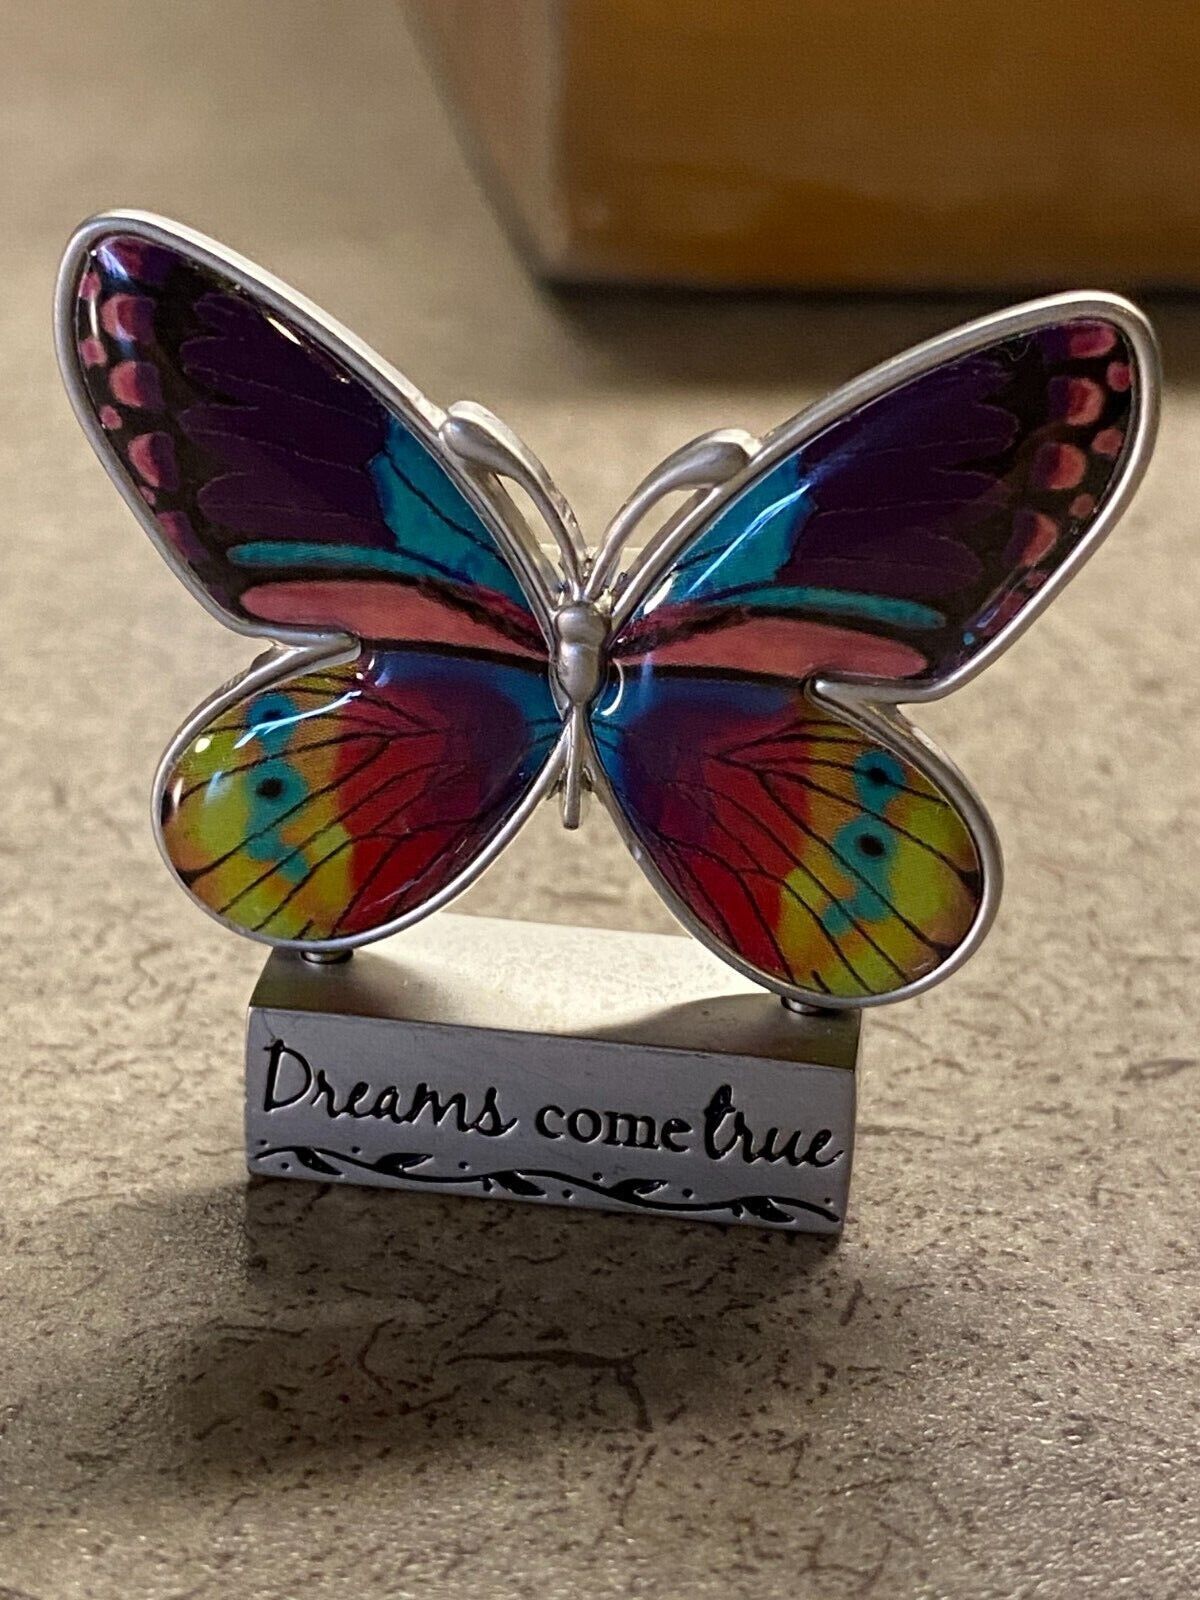 Butterfly Blessings Figurine-Dreams Come True